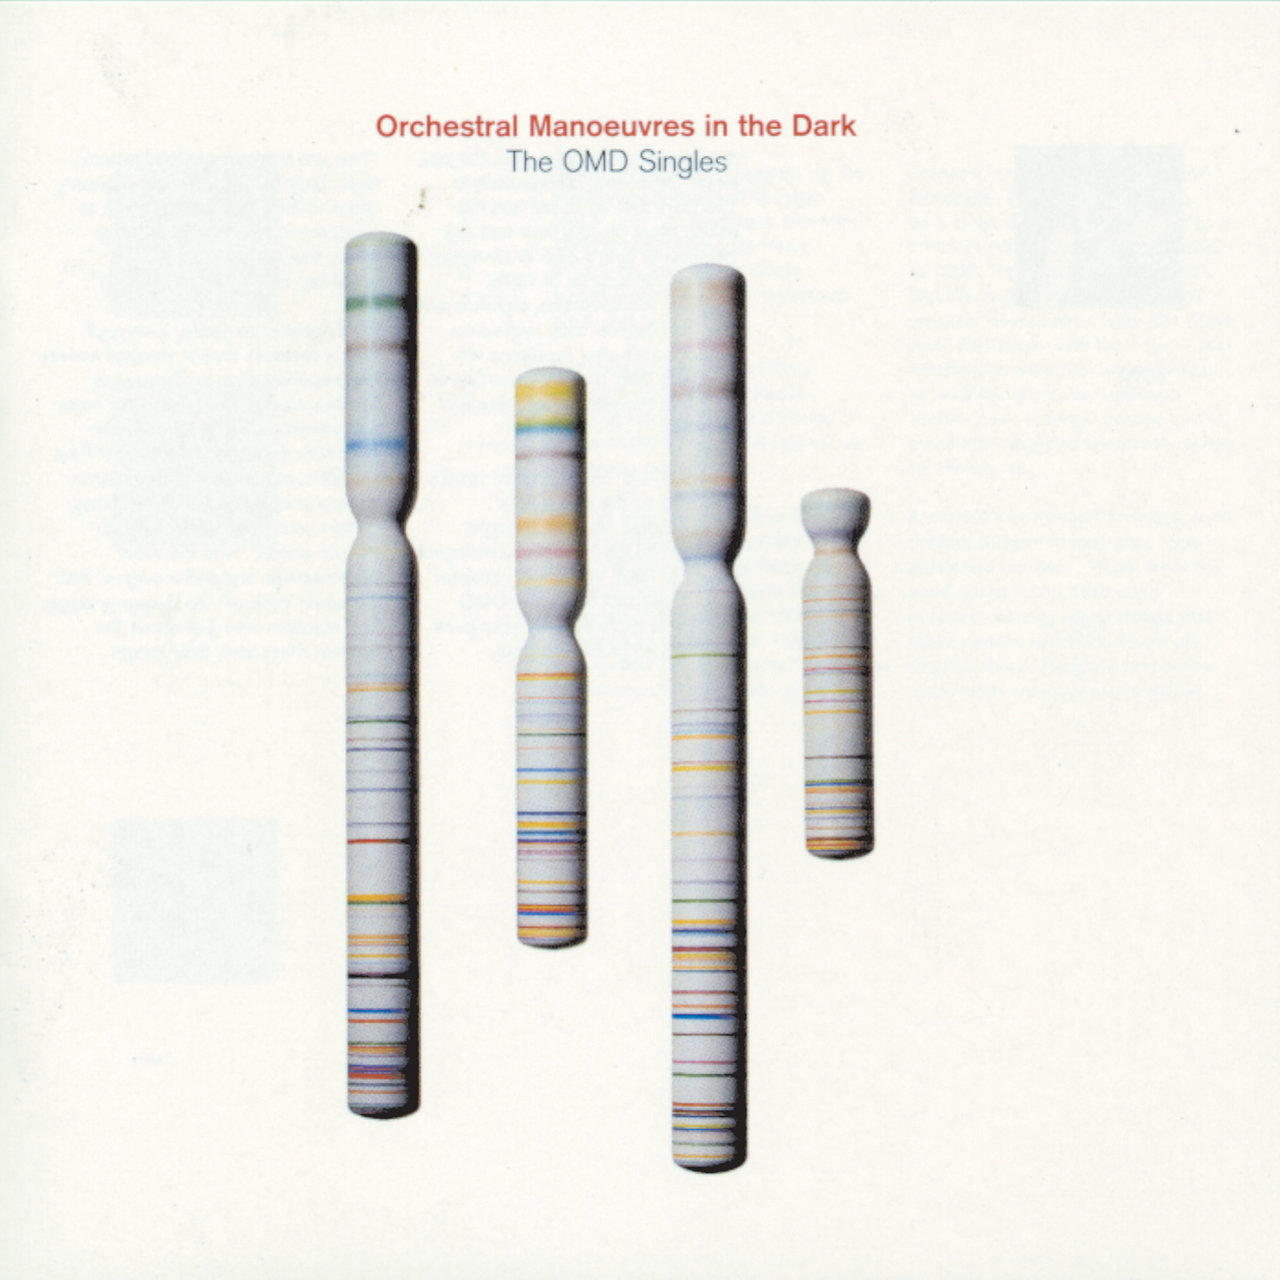 Orchestral Manoeuvres In The Dark (OMD) - The OMD Singles [1998] cd1